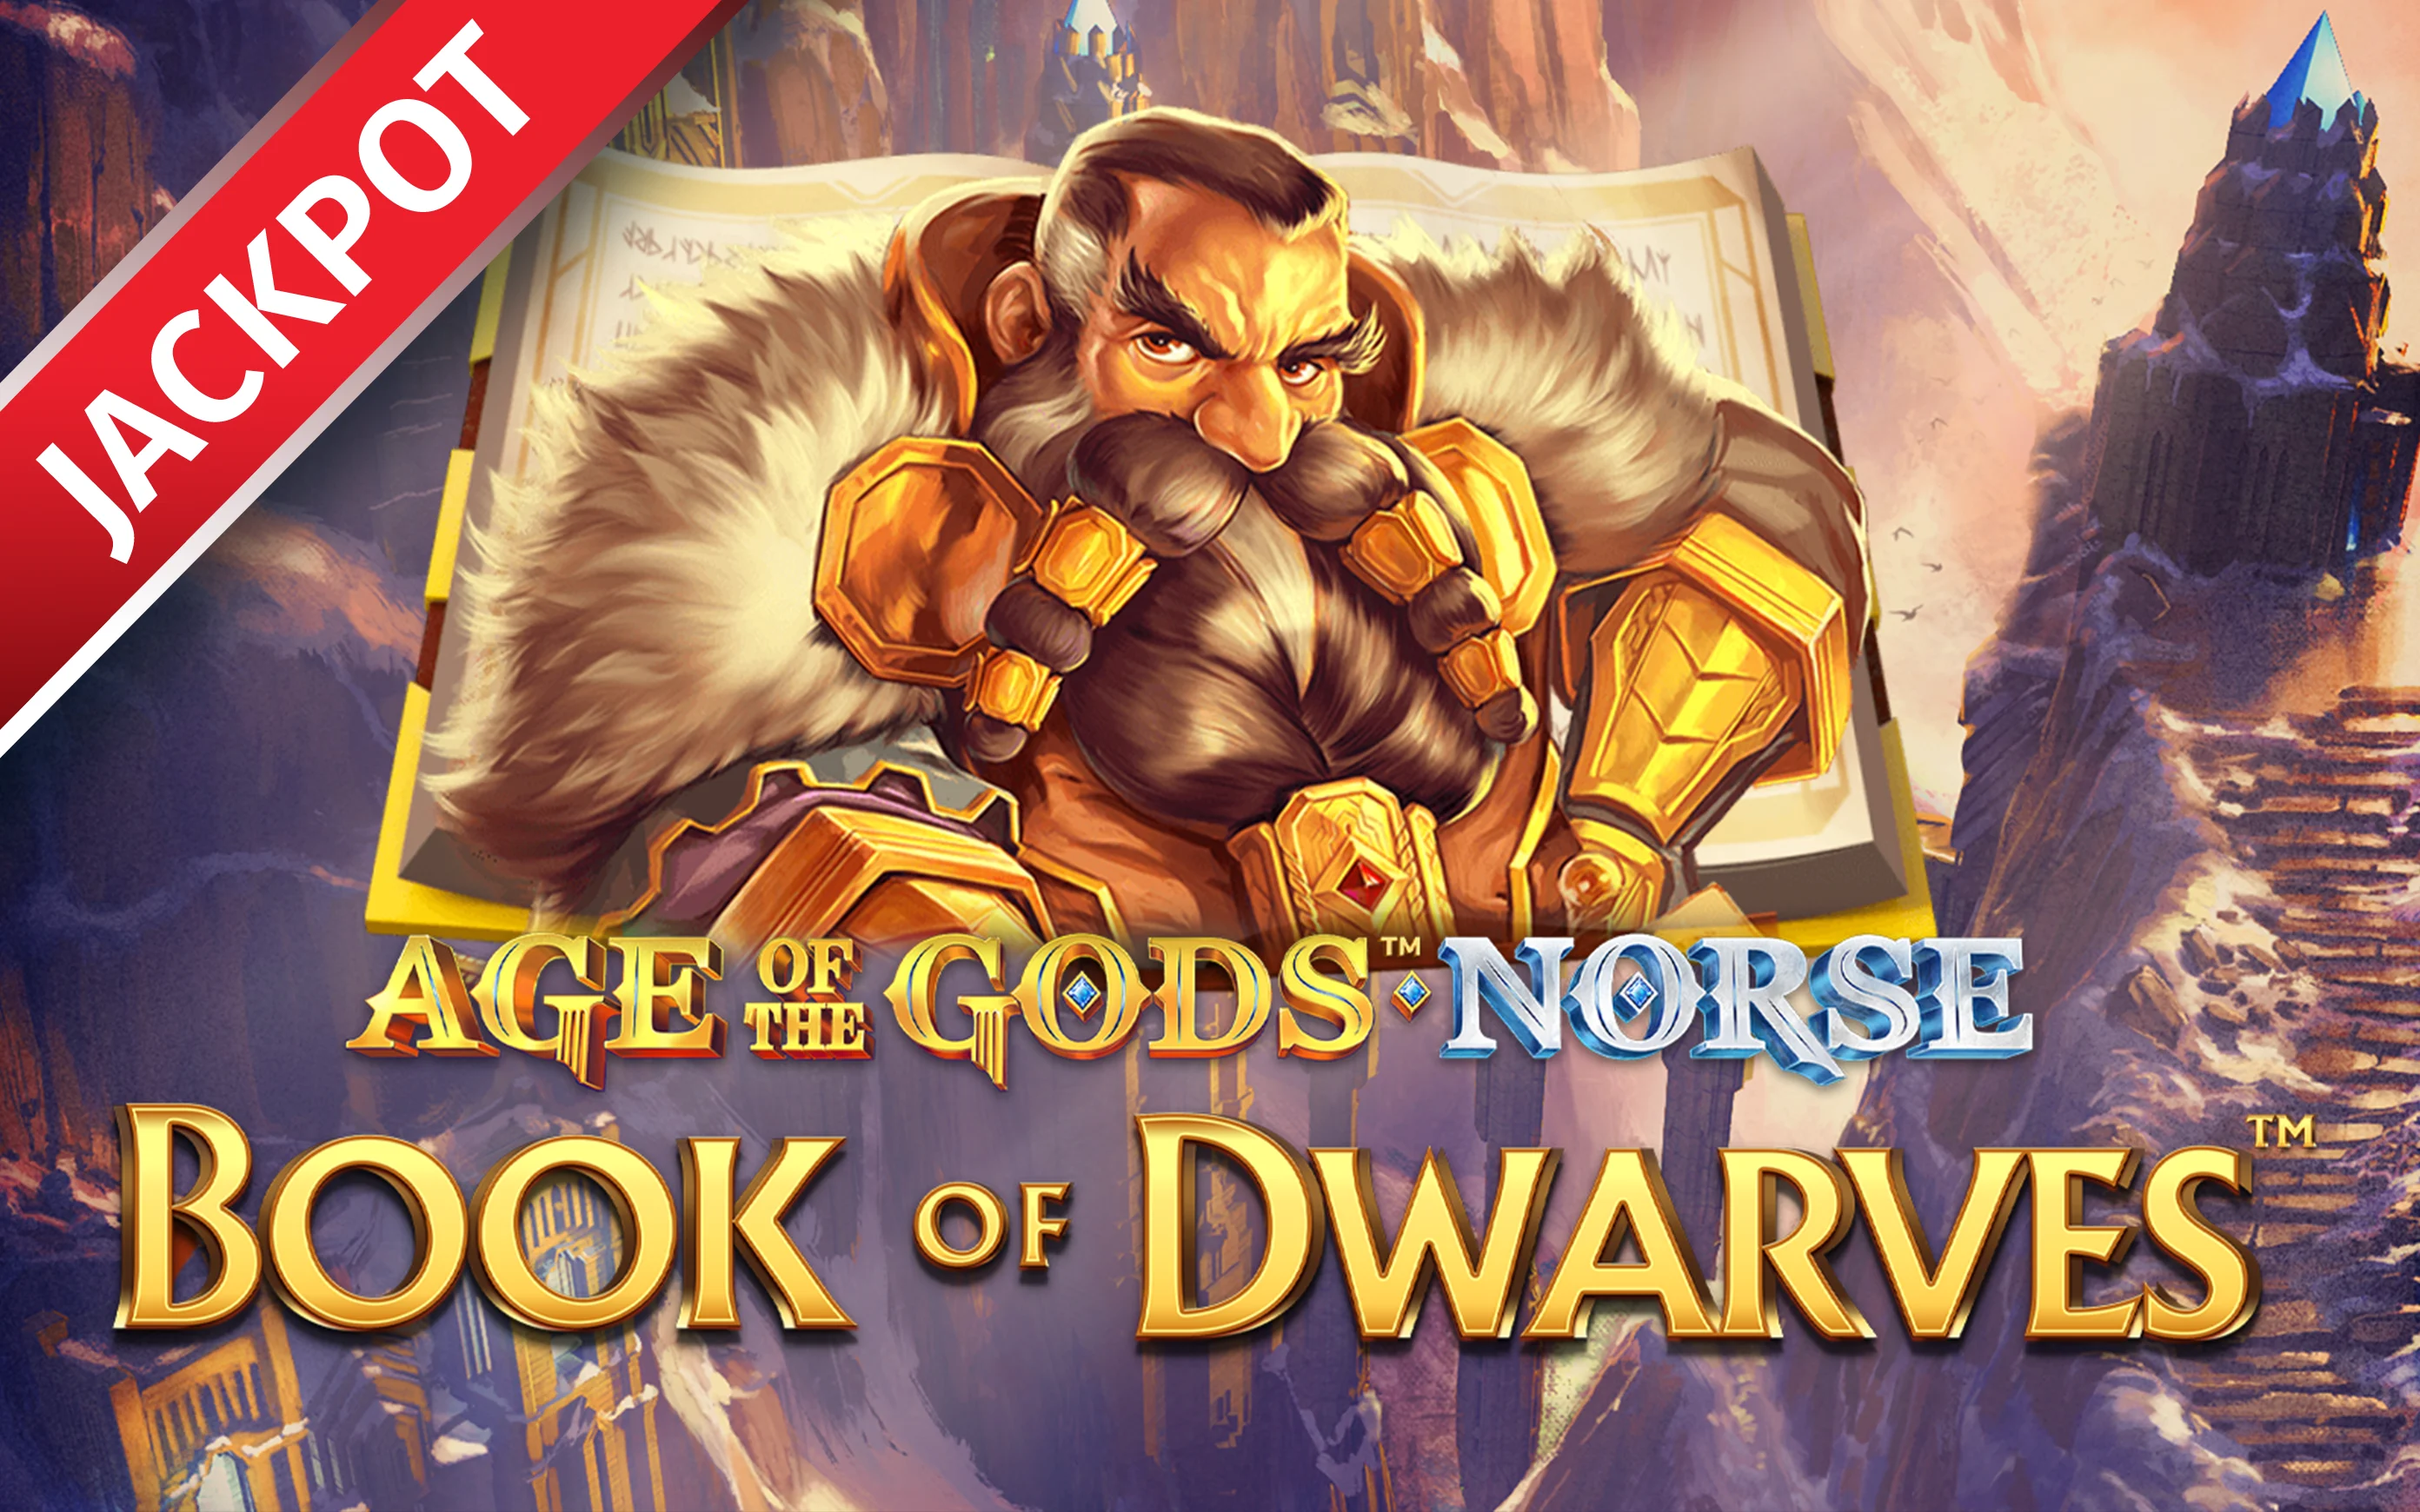 Play Age of the Gods Norse: Book of Dwarves on Starcasino.be online casino